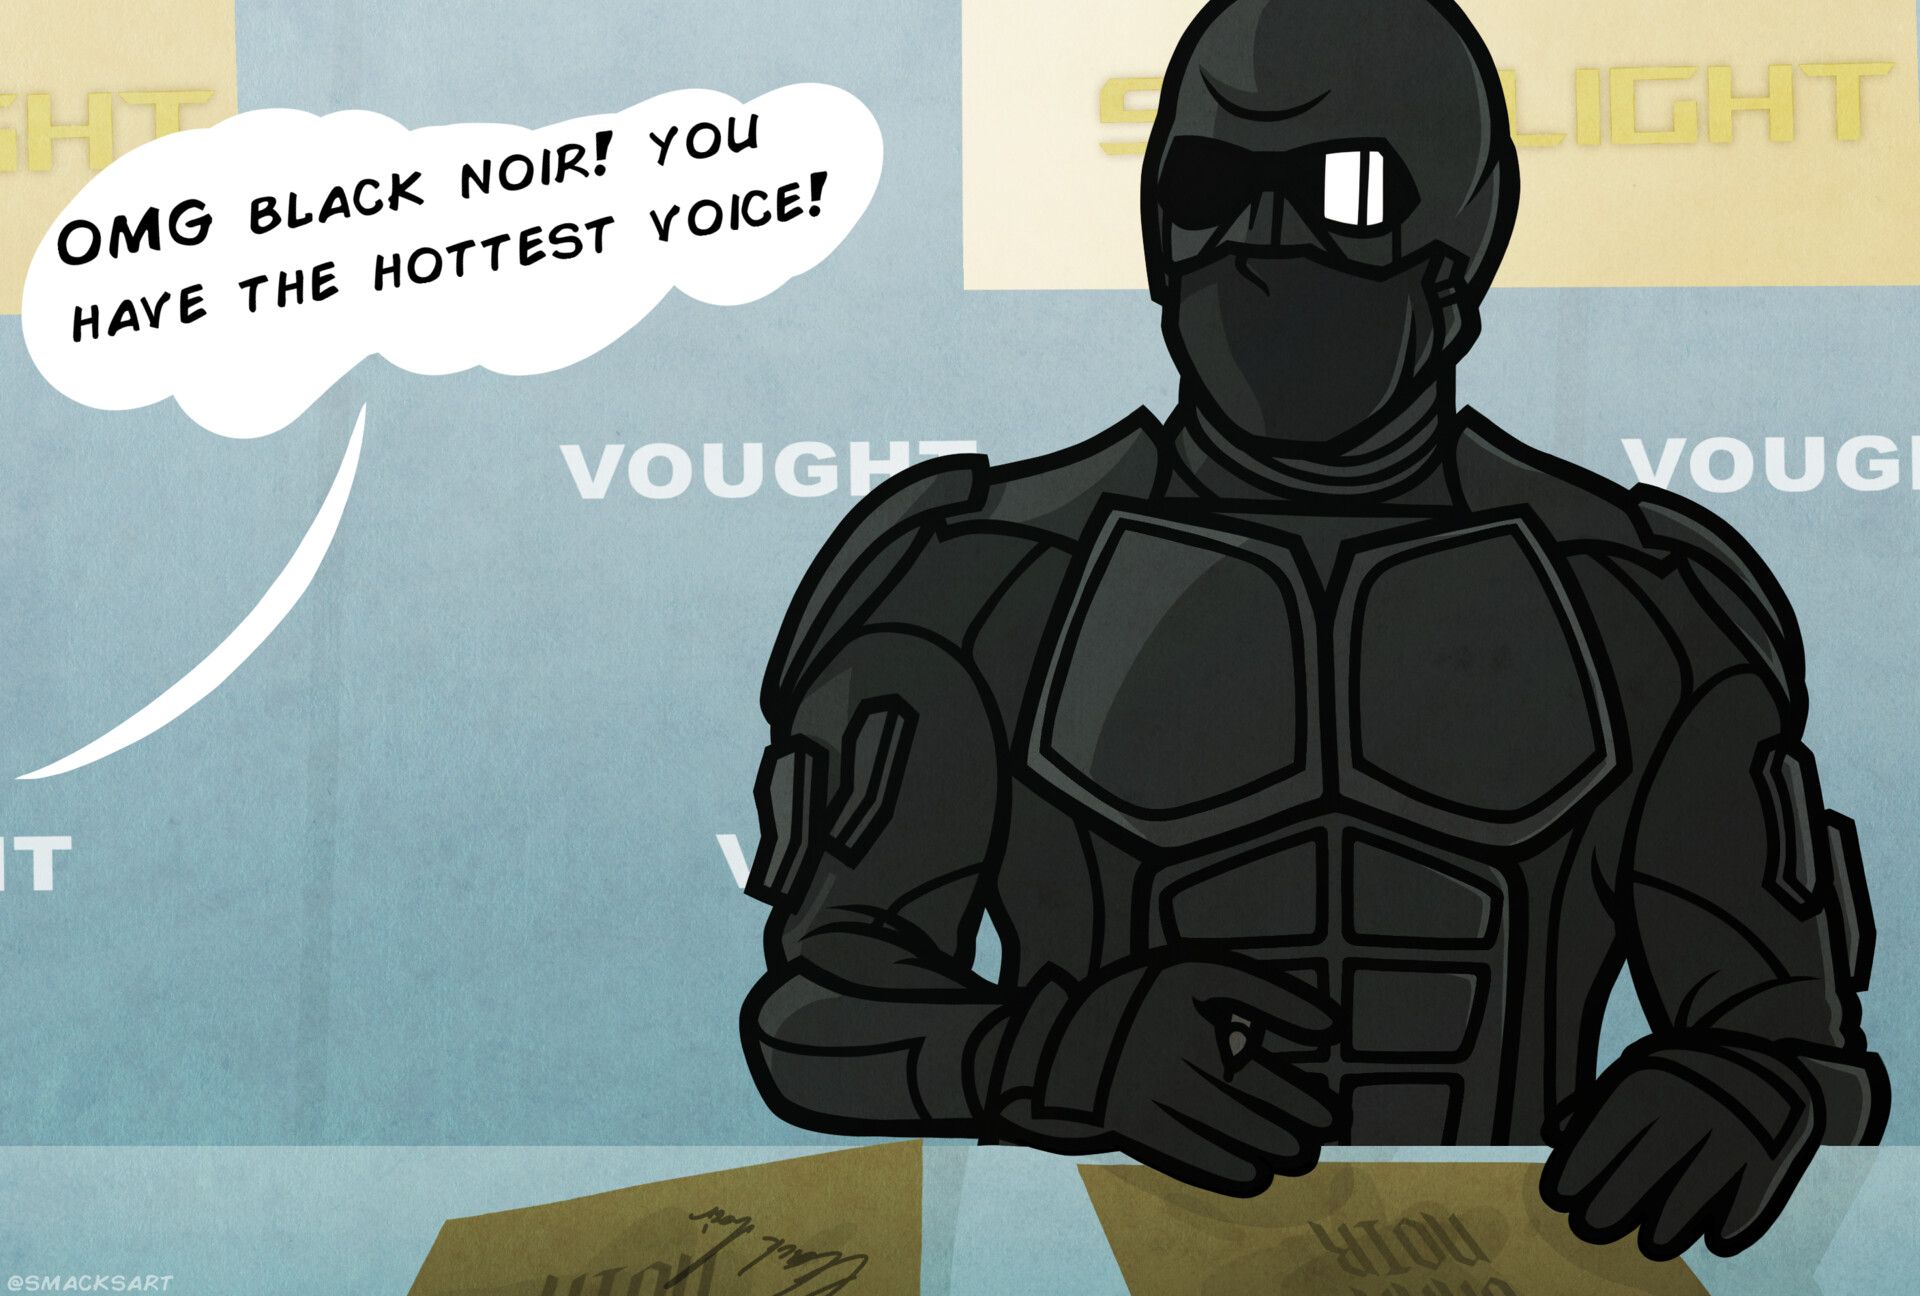 Fanart of Black Noir being complimented for his voice